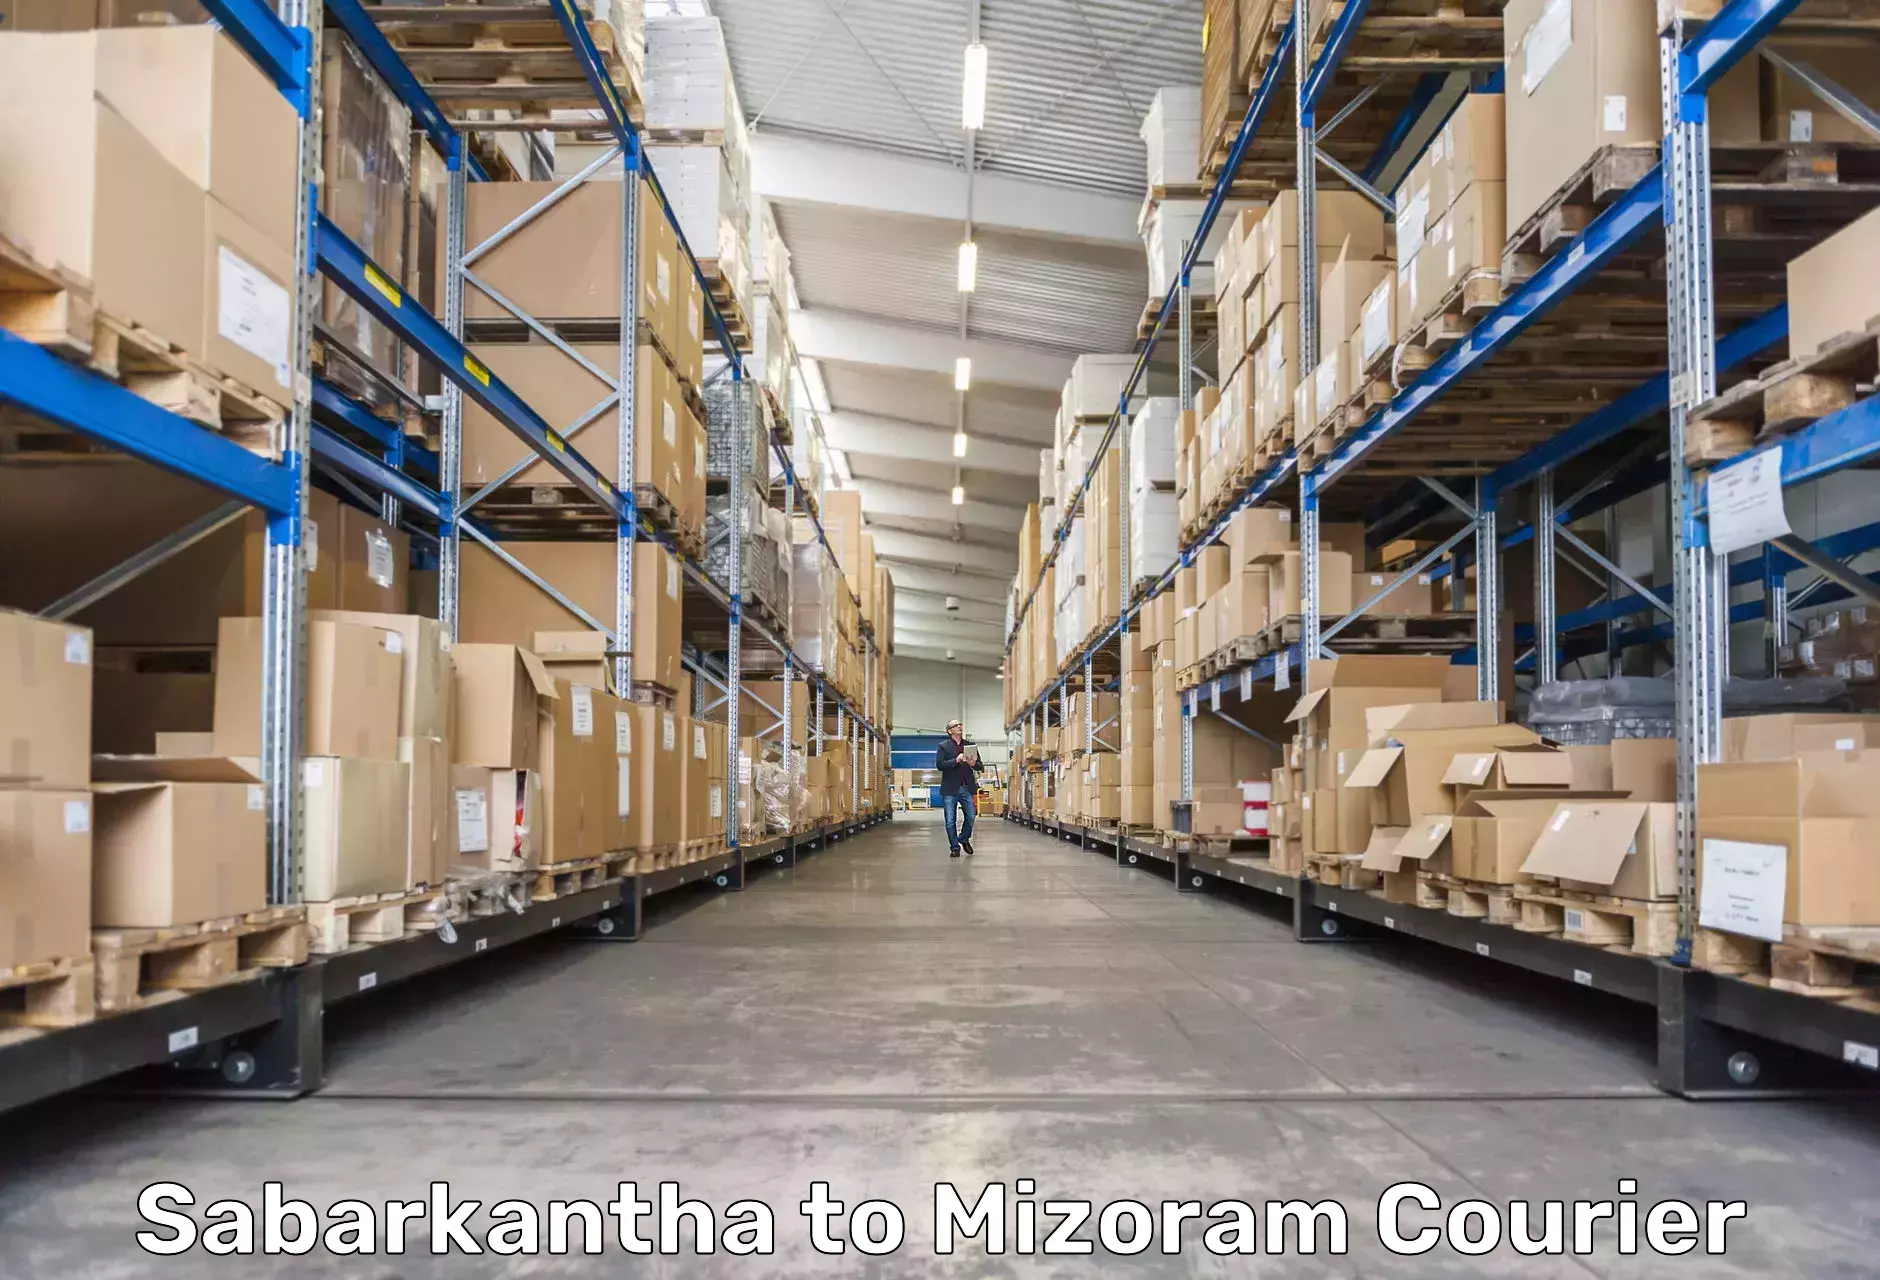 Global courier networks Sabarkantha to Darlawn